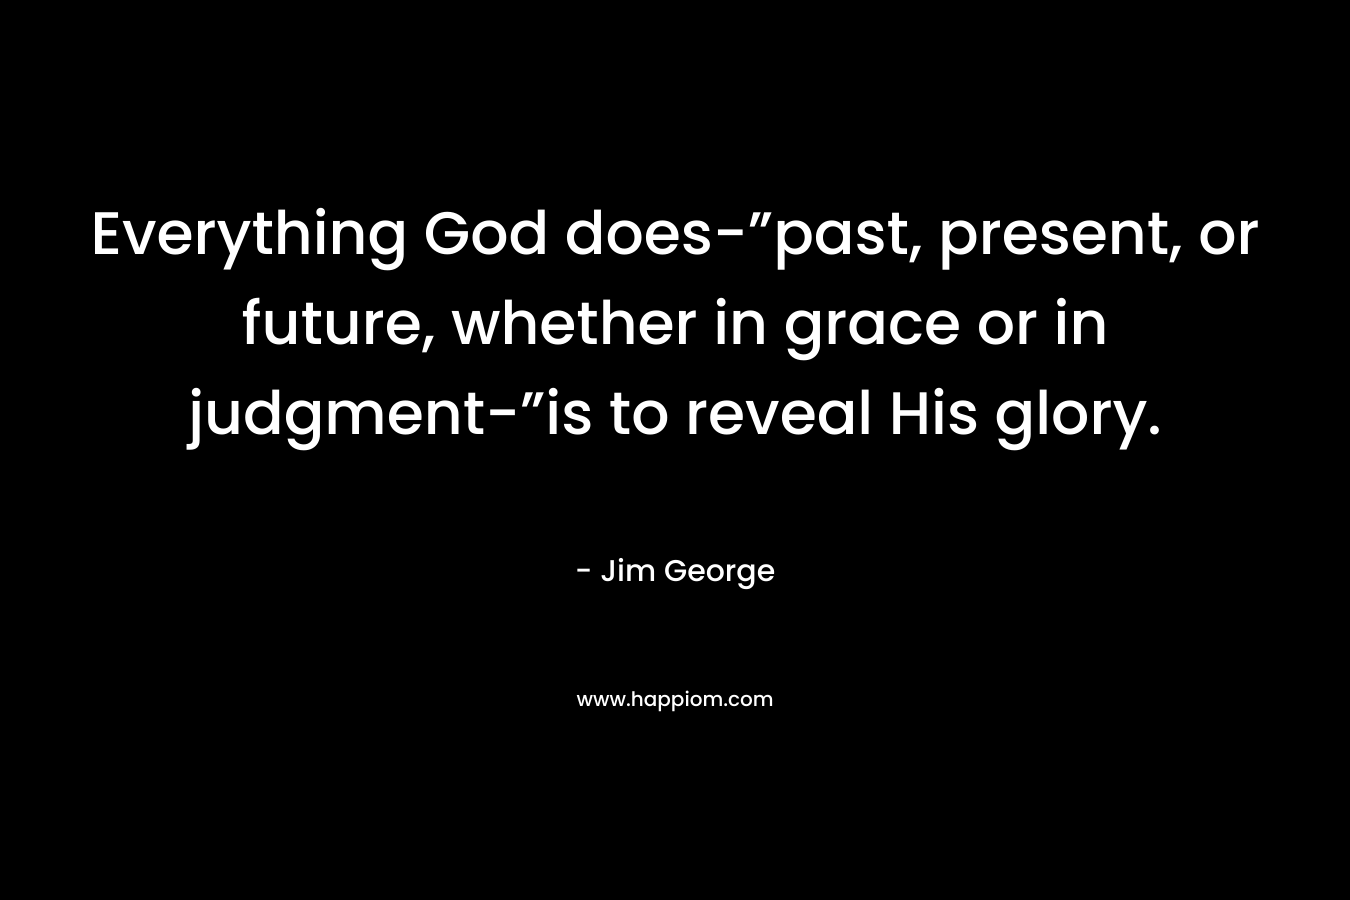 Everything God does-”past, present, or future, whether in grace or in judgment-”is to reveal His glory.